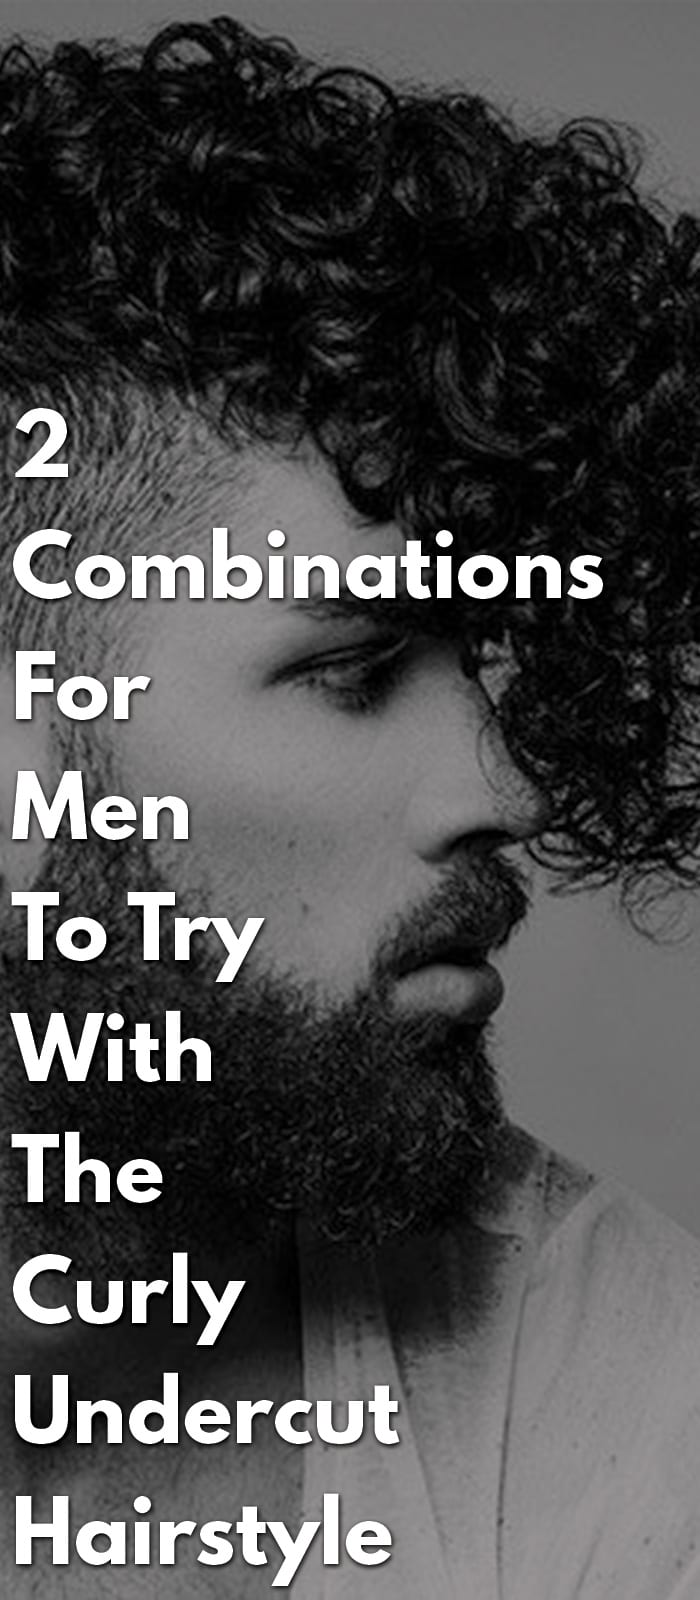 2 Combinations For Men To Try With The Curly Undercut Hairstyle